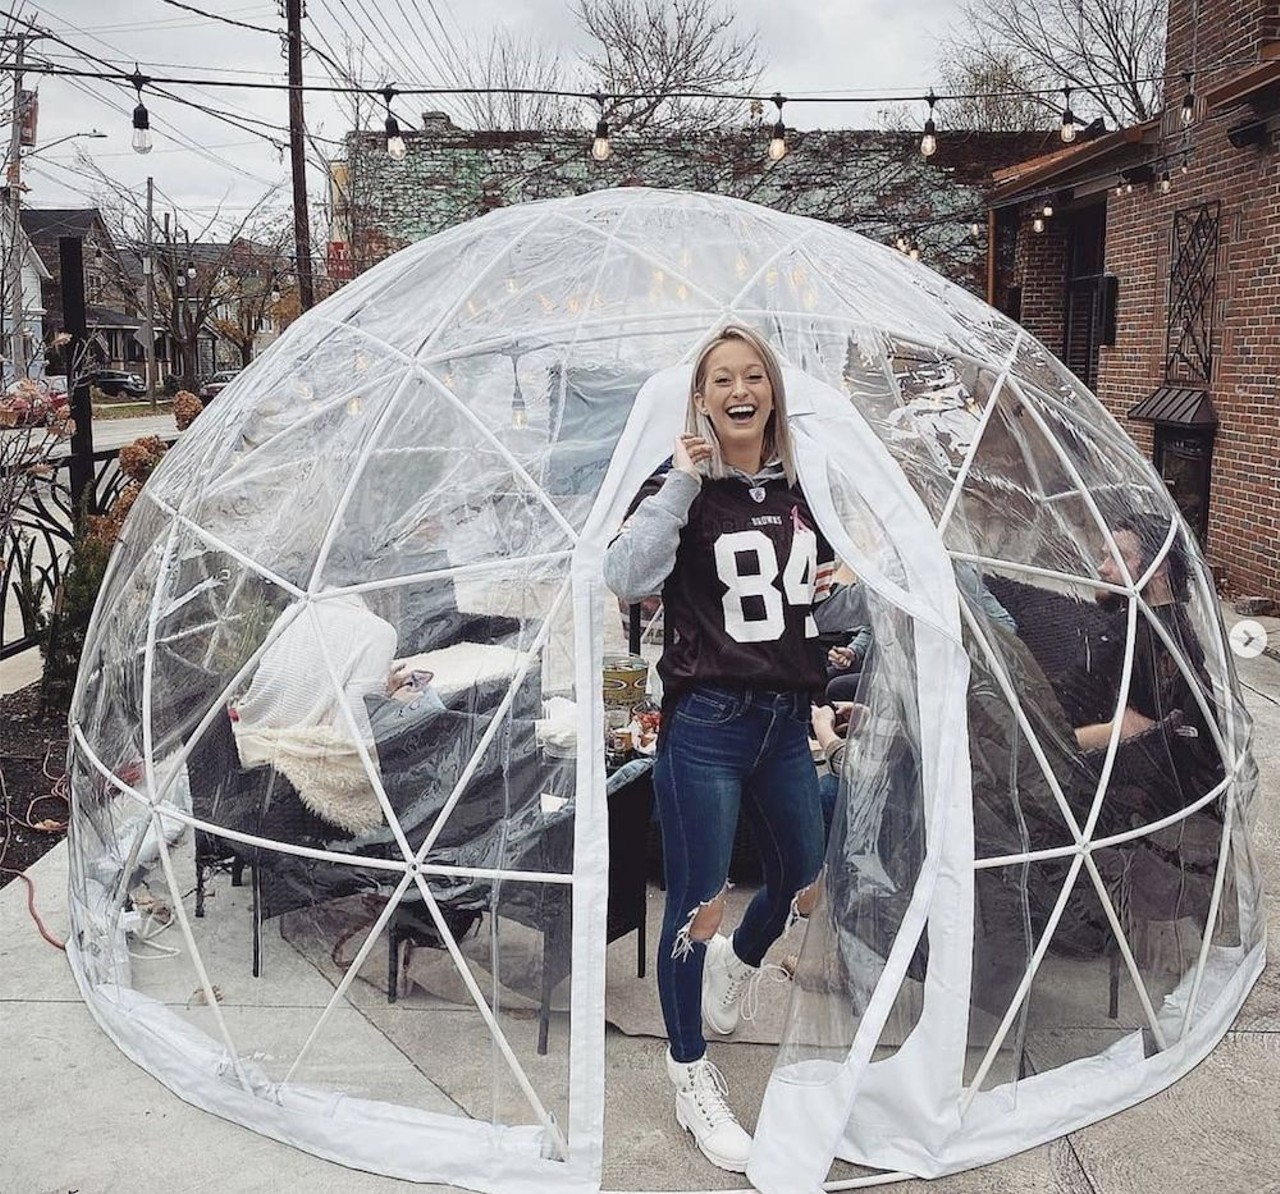  Dining in an Igloo
Due to the pandemic, dining an igloo has become the thing to do around Cleveland and the rest of the country. And of course it makes for an awesome Instagram shot.
Photo via Scene Archives